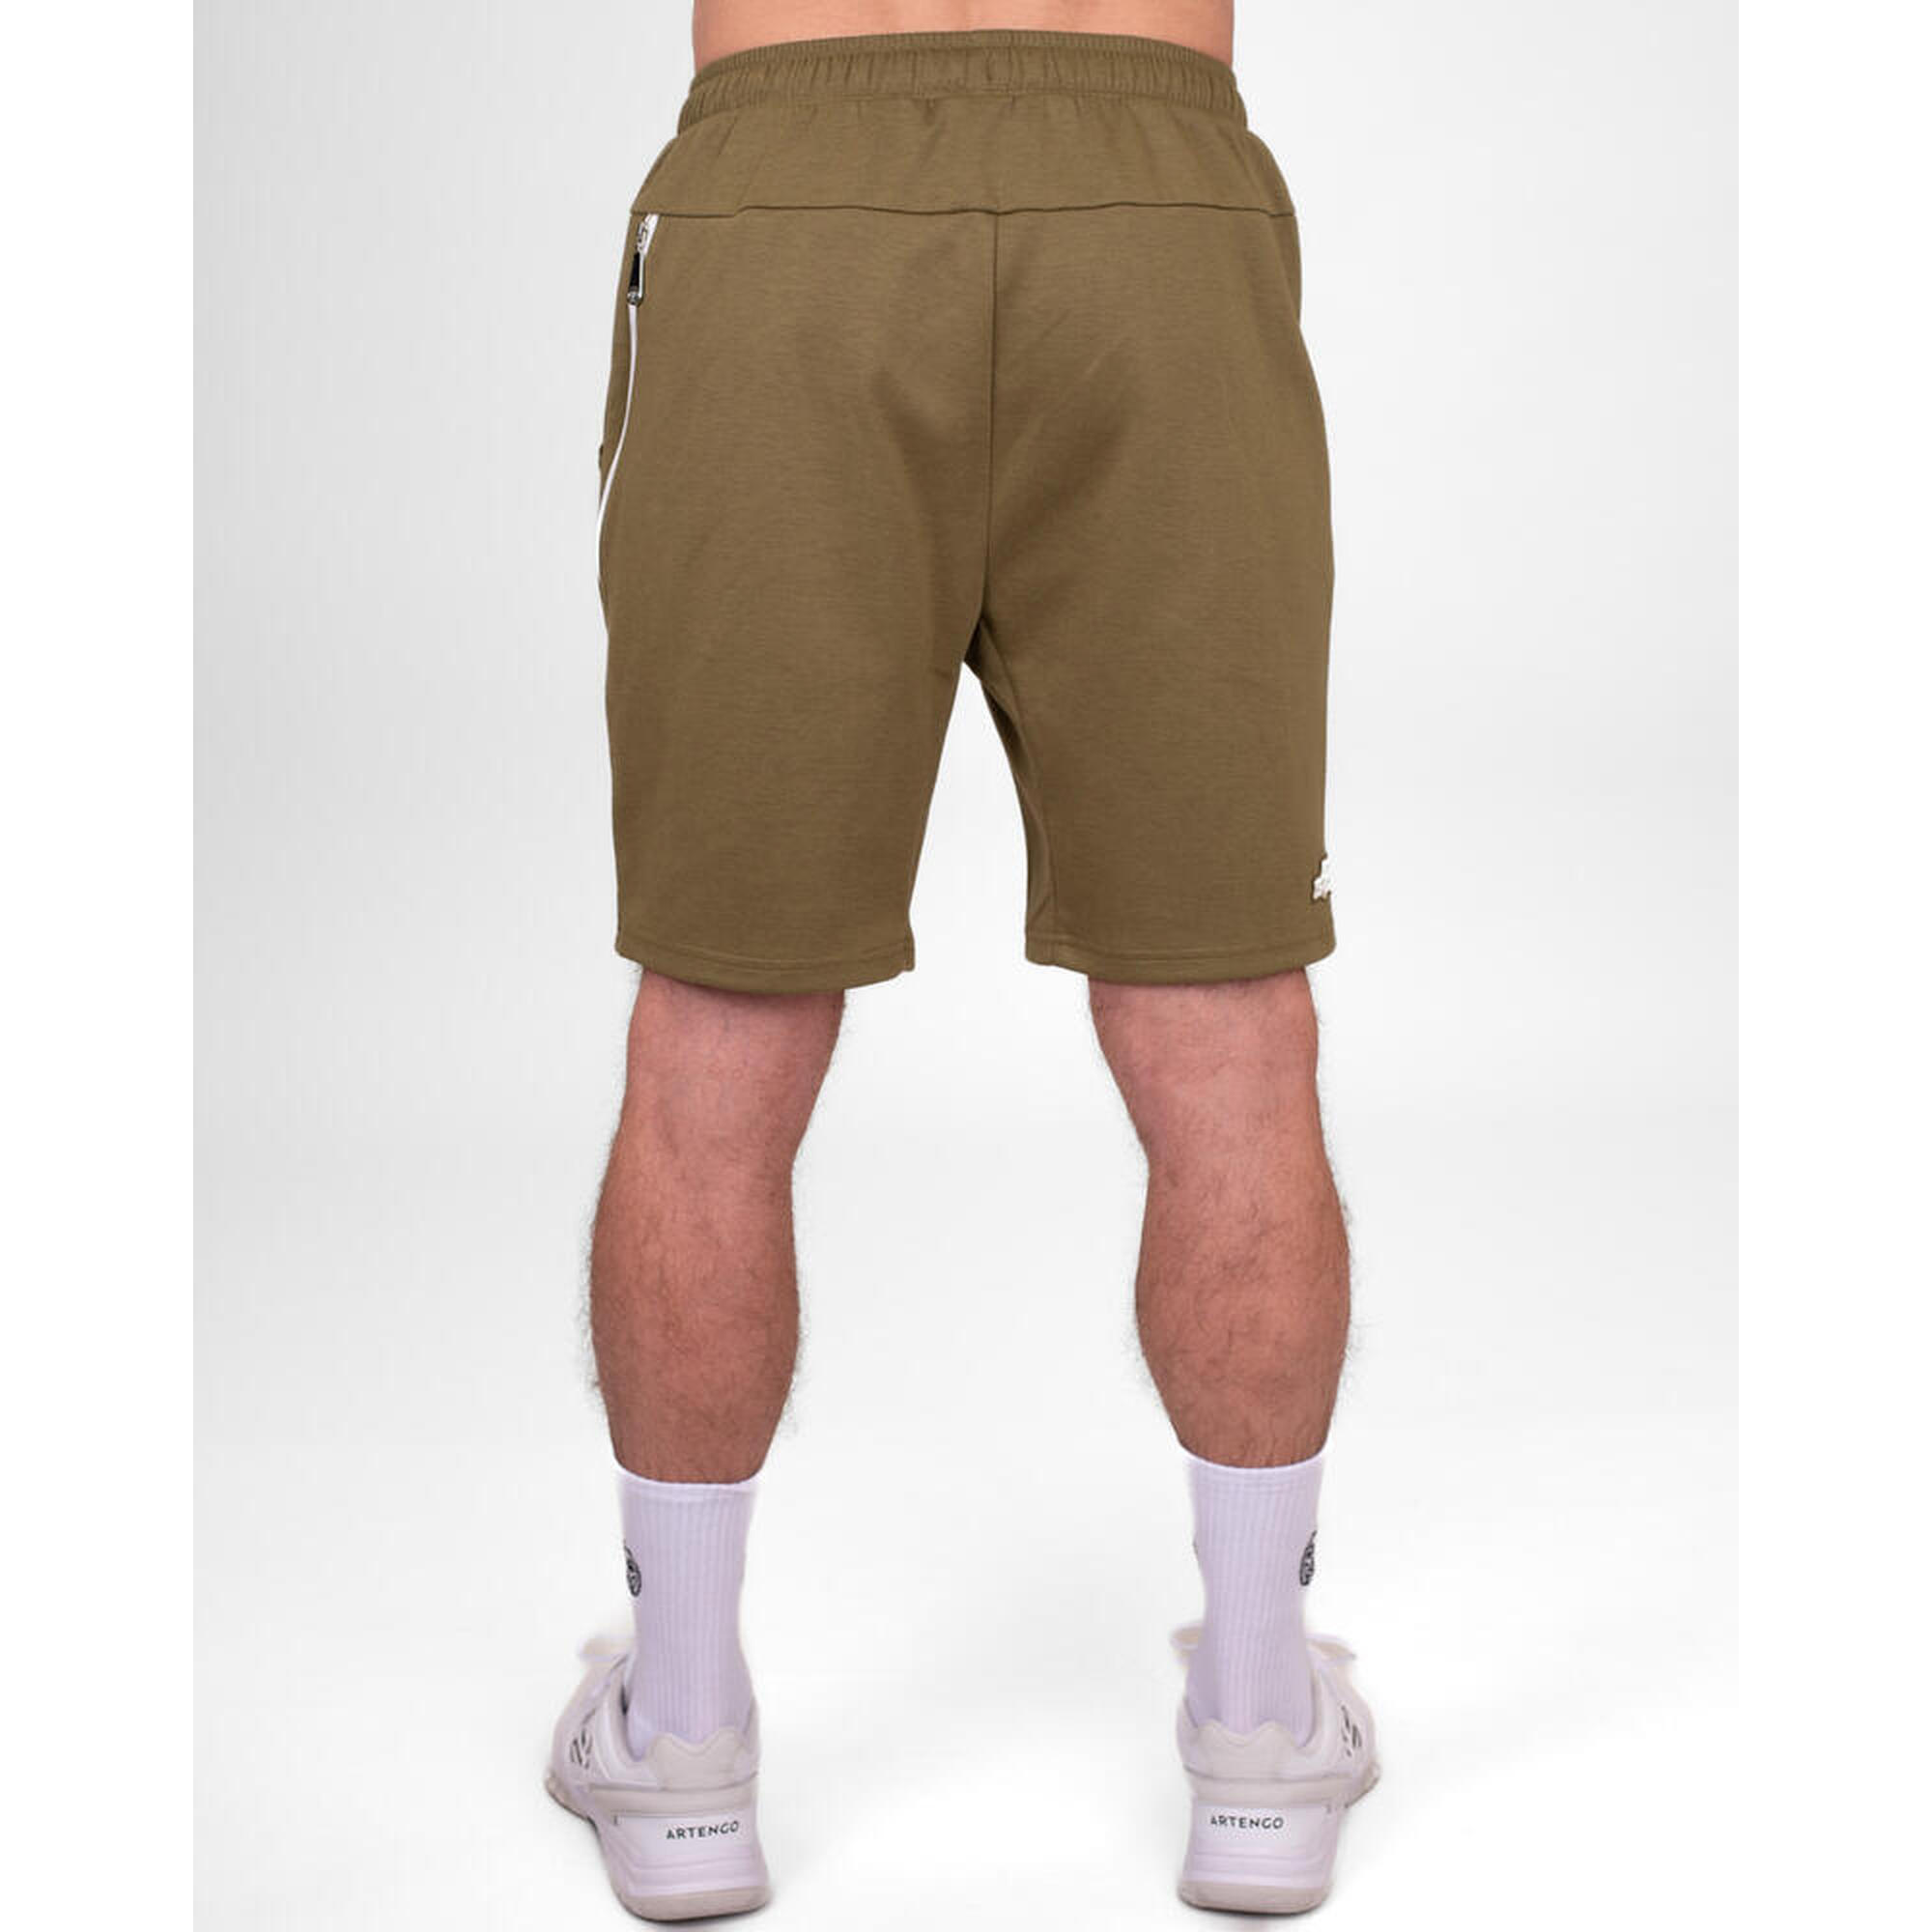 Chill Shorts - olive